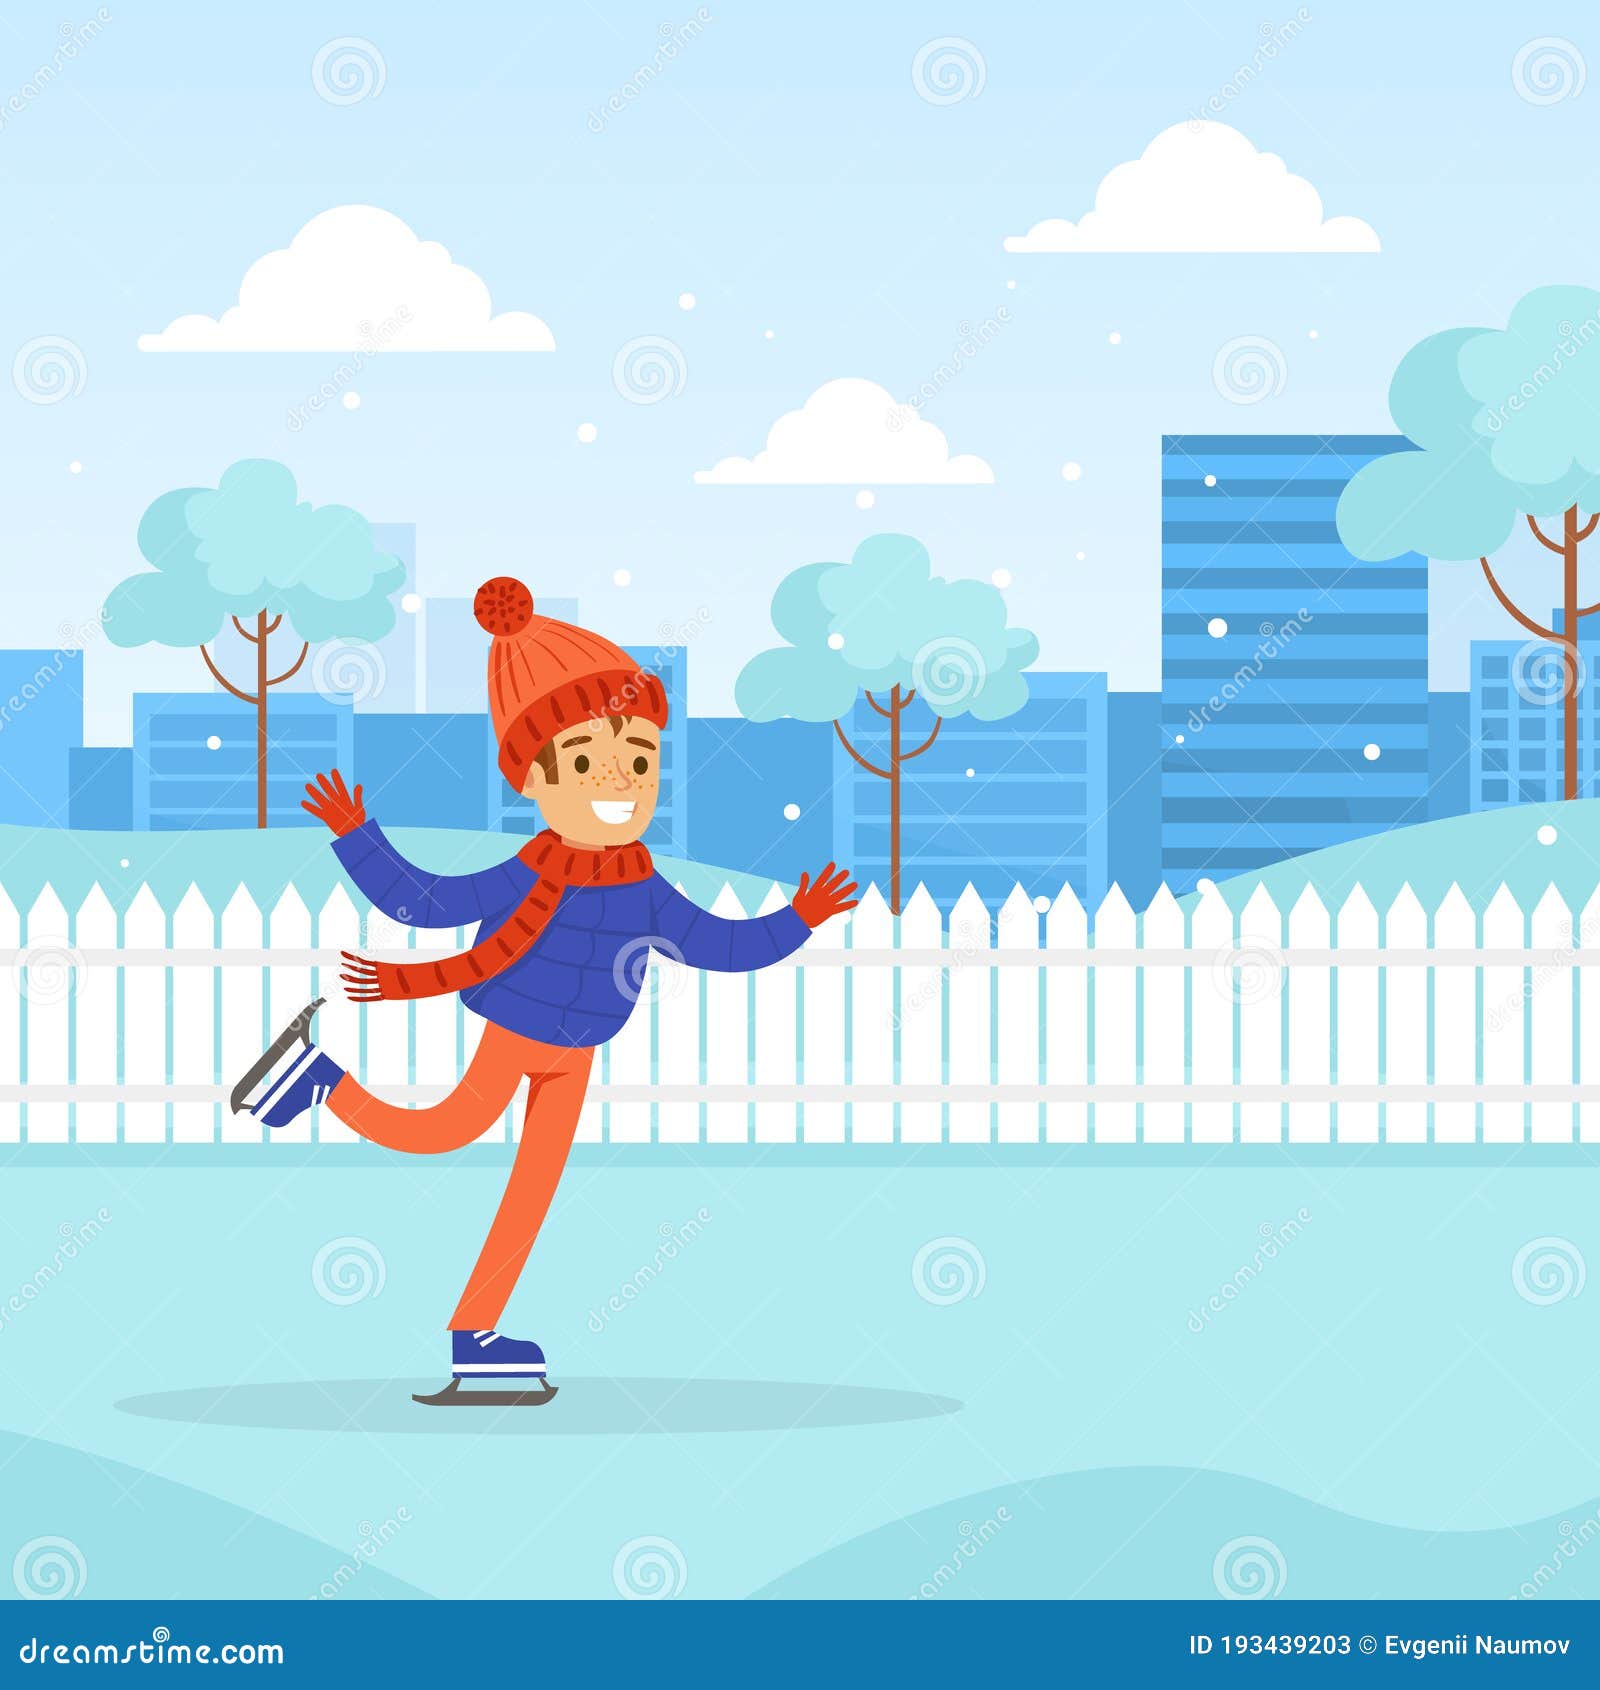 Cute Boy Dressed in Warm Clothing Skating on Rink, Winter Sports Outdoor  Activity Cartoon Style Vector Illustration Stock Vector - Illustration of  lifestyle, happy: 193439203